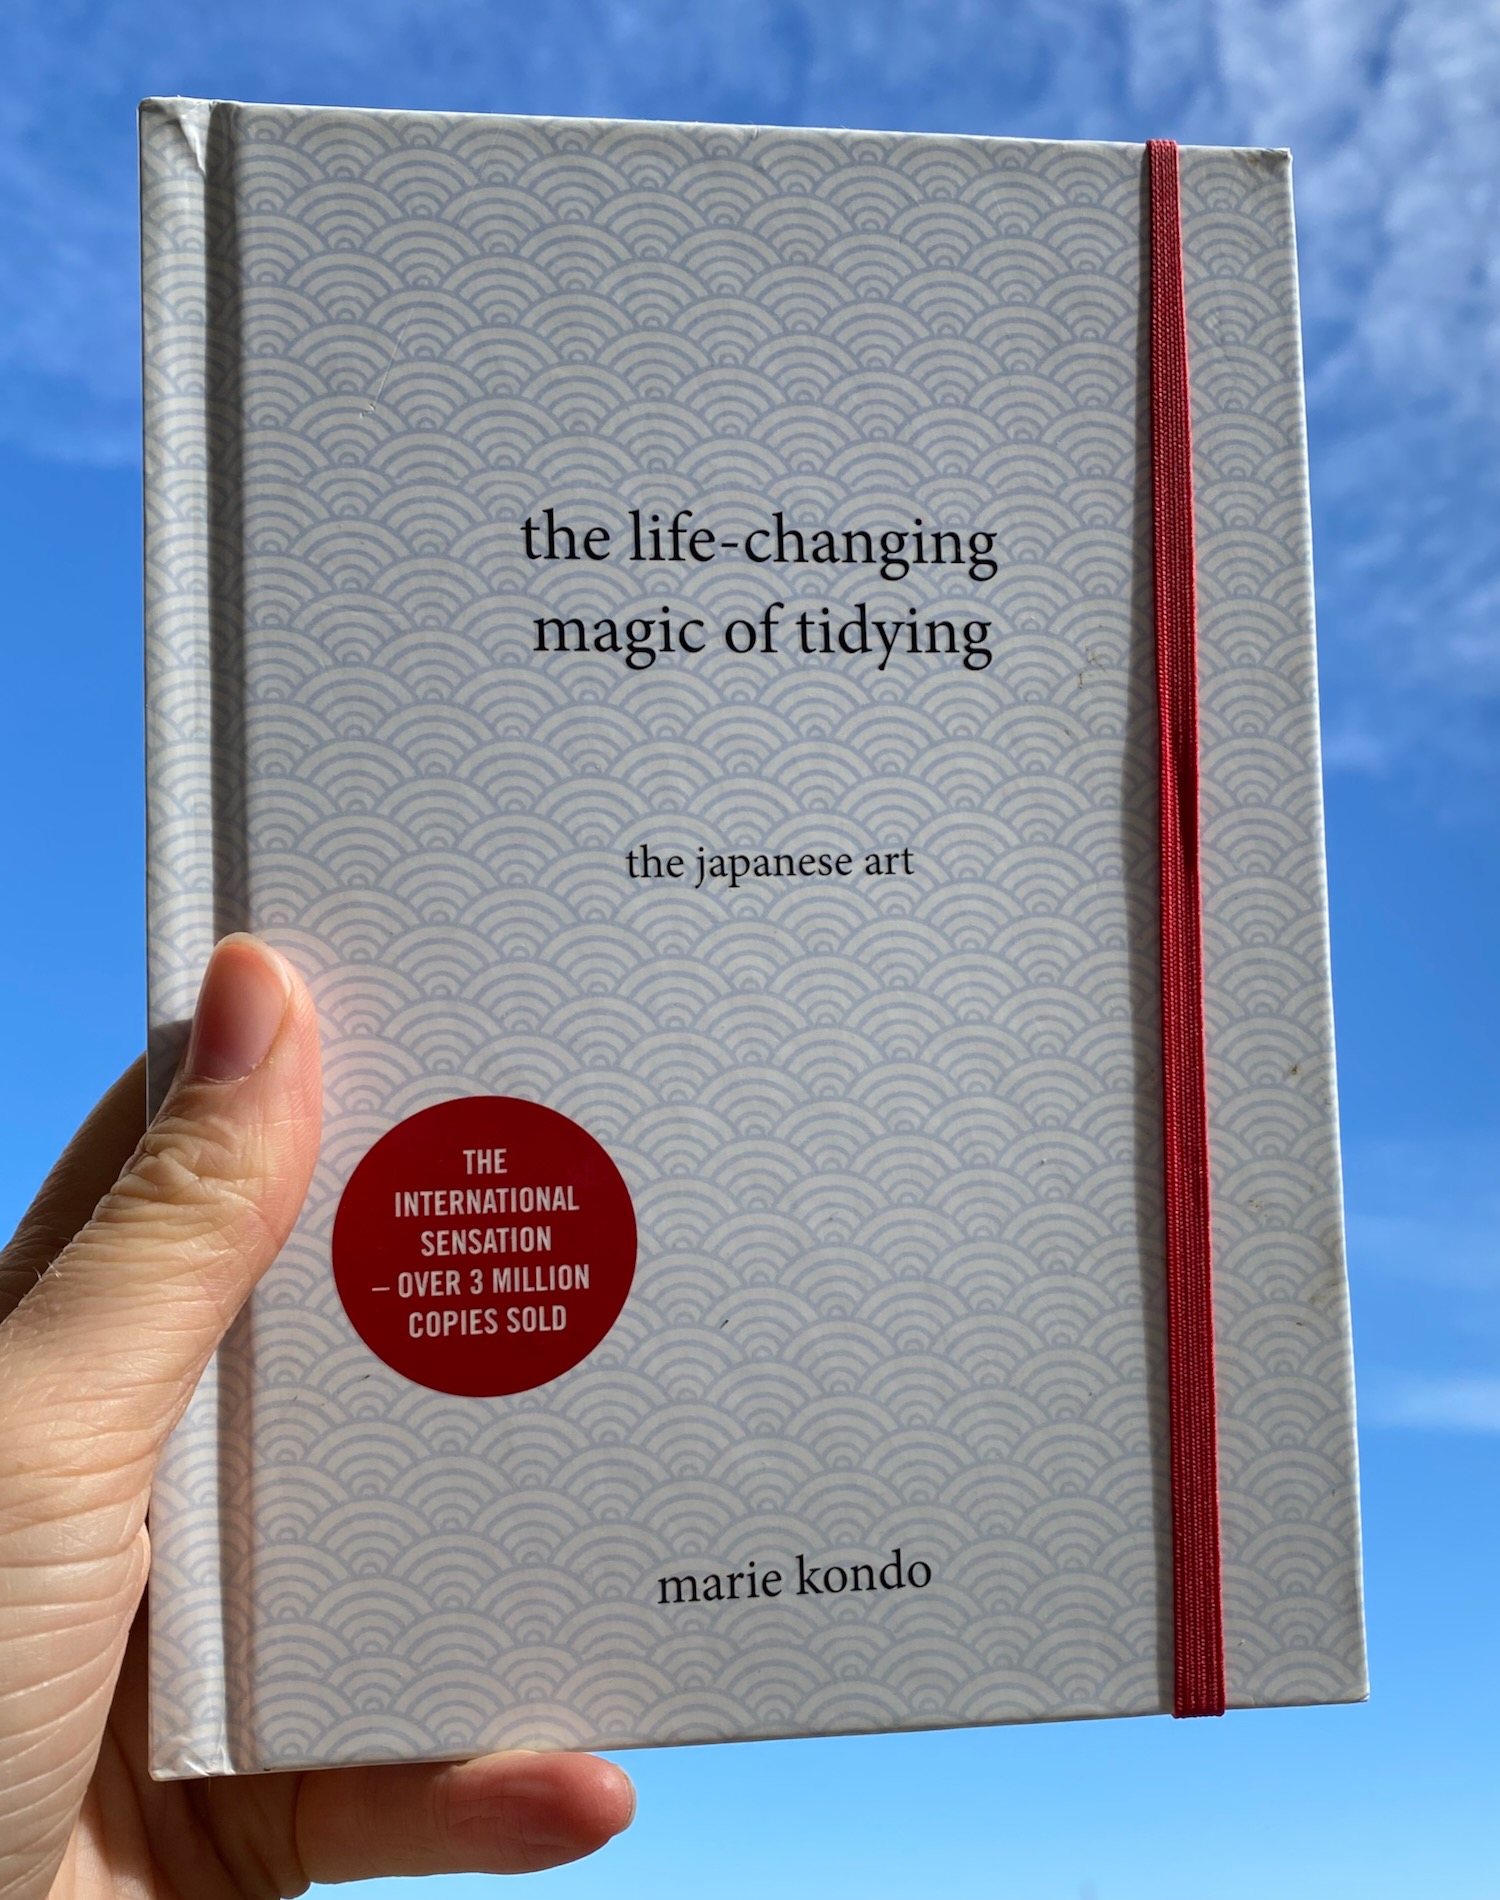 Marie Kondo: The Life-Changing Magic of Tidying Up